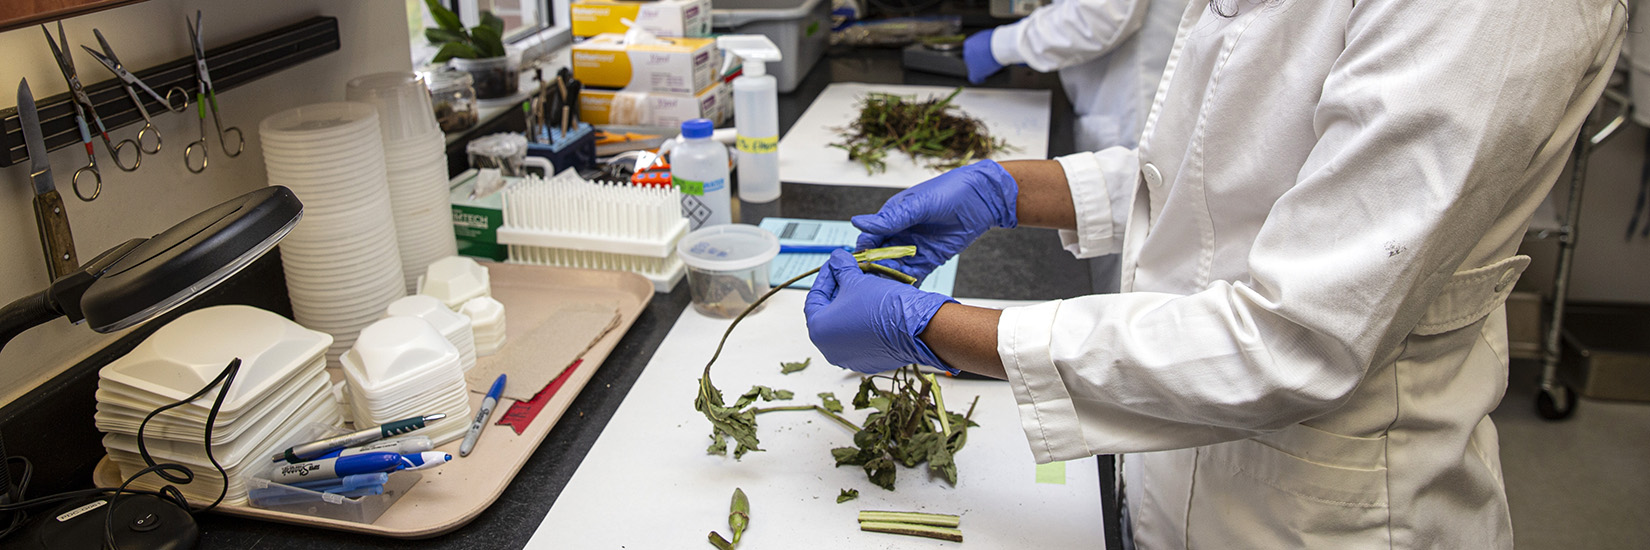 gloved hands of a person examining a plant inside a laboratory